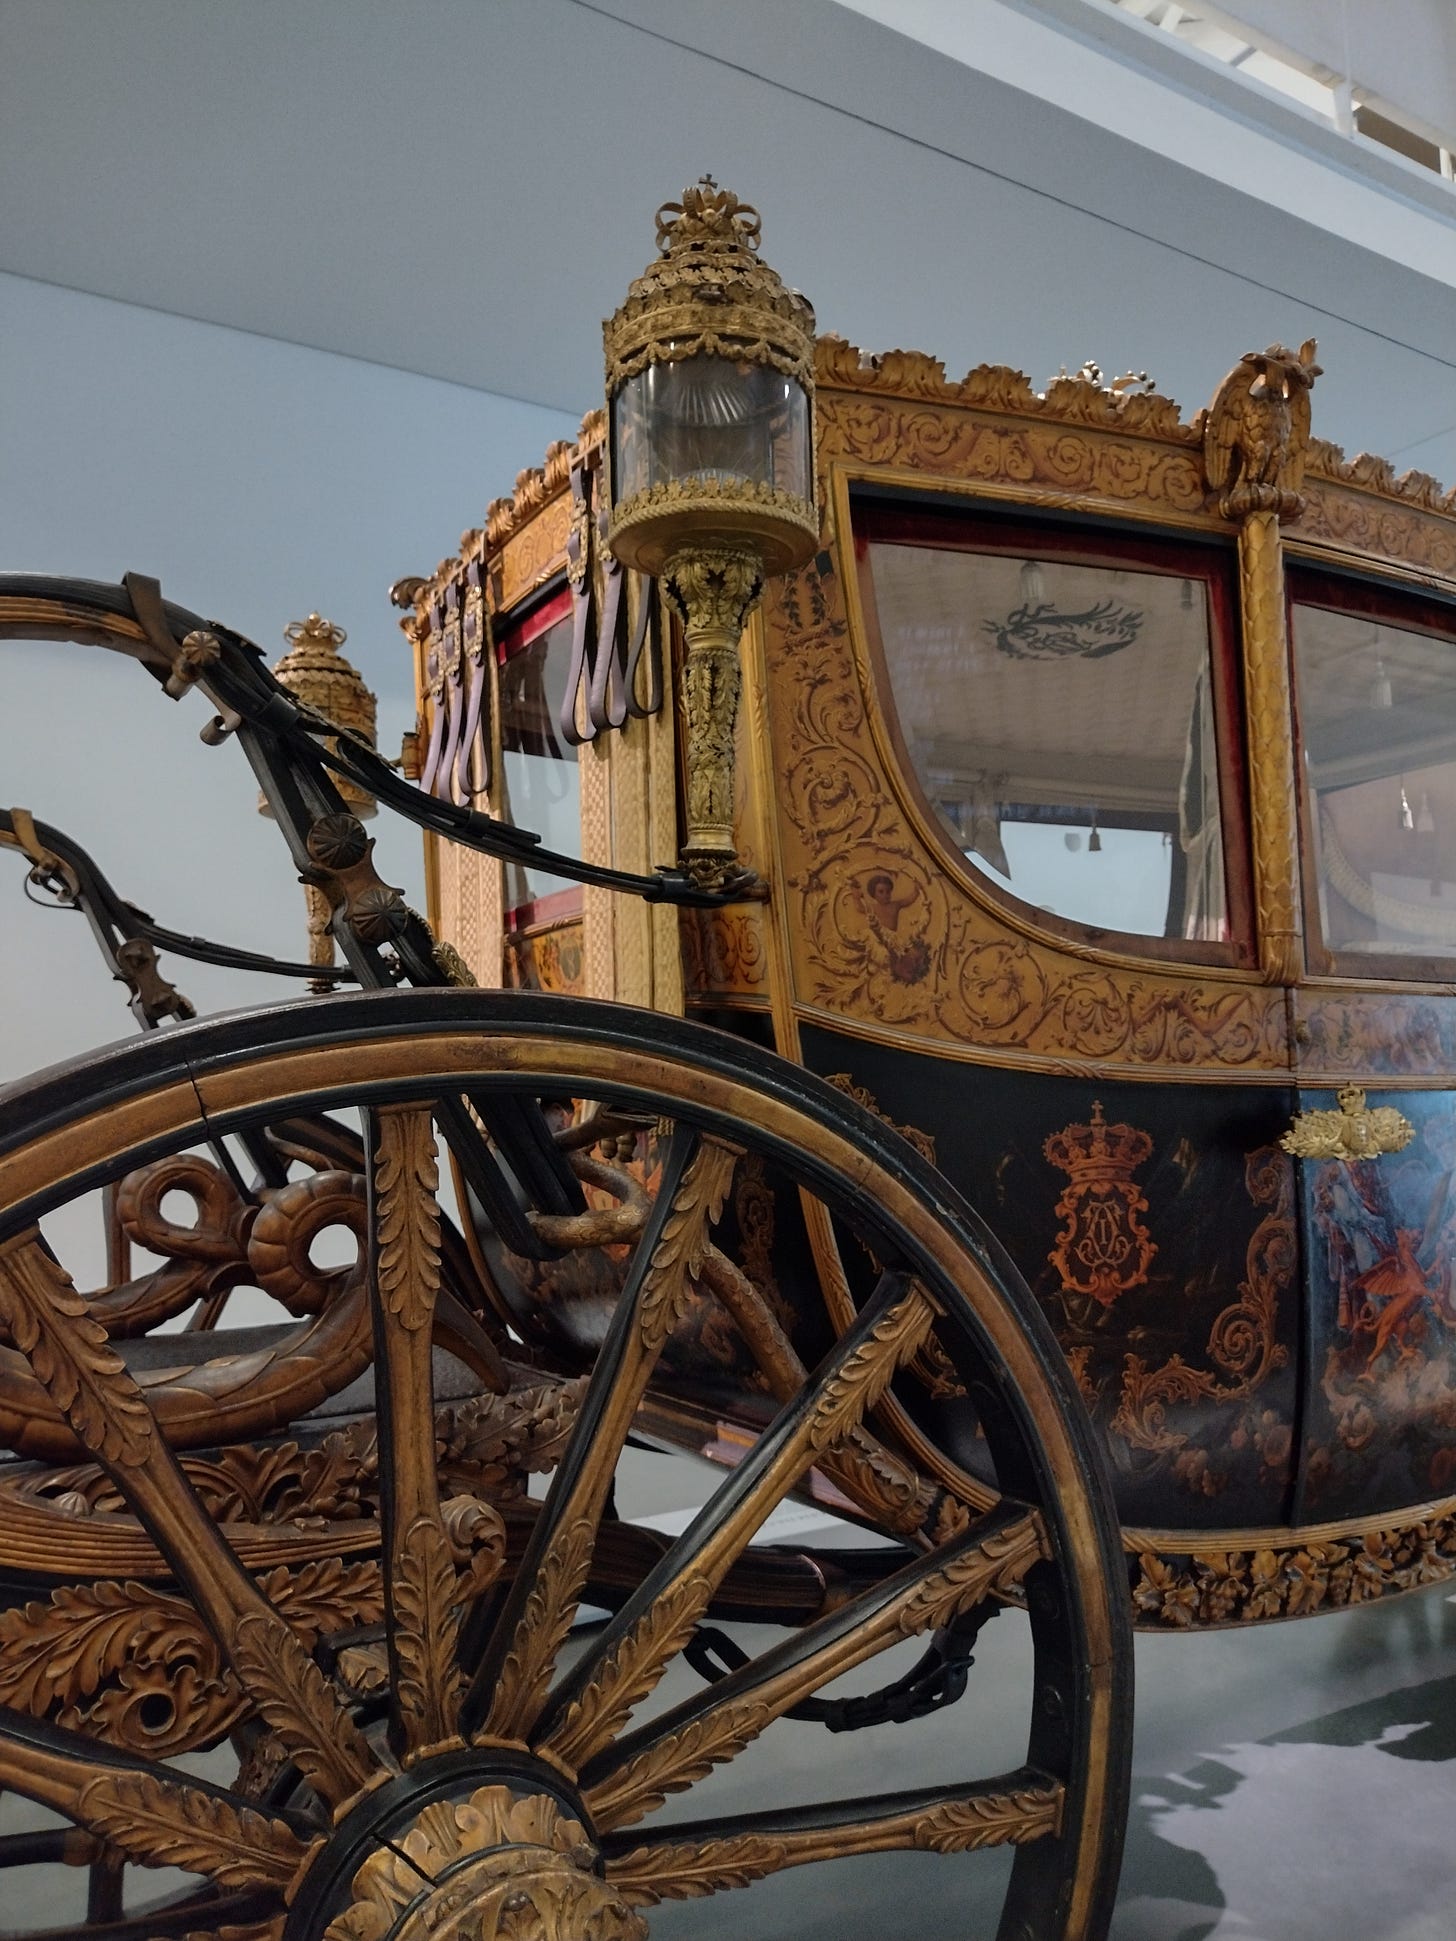 Image of the wheel and carriage of an ornate coach.